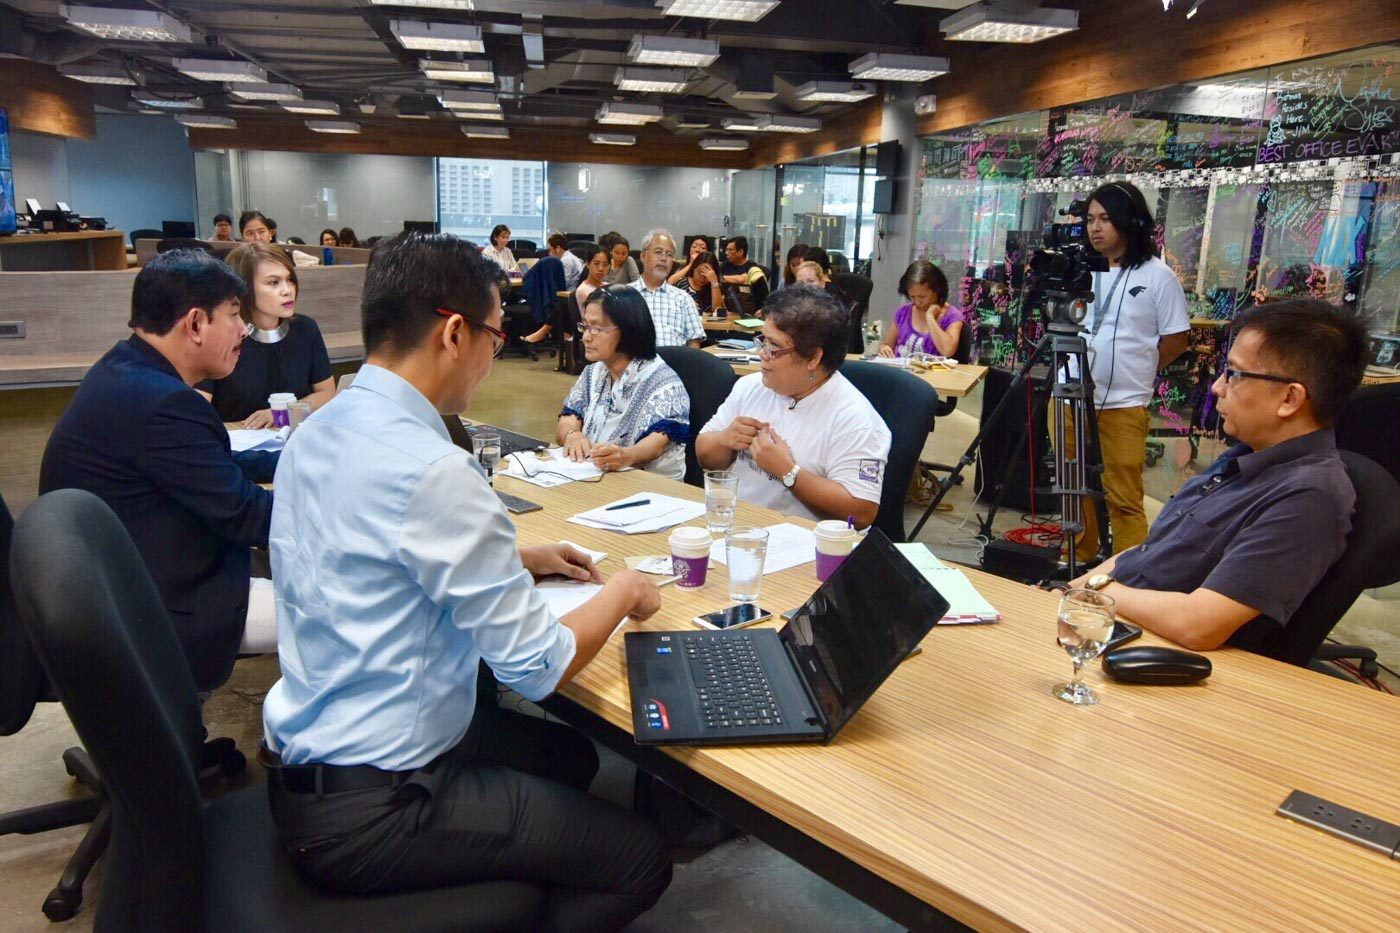 How can we ensure onsite protection for OFWs?